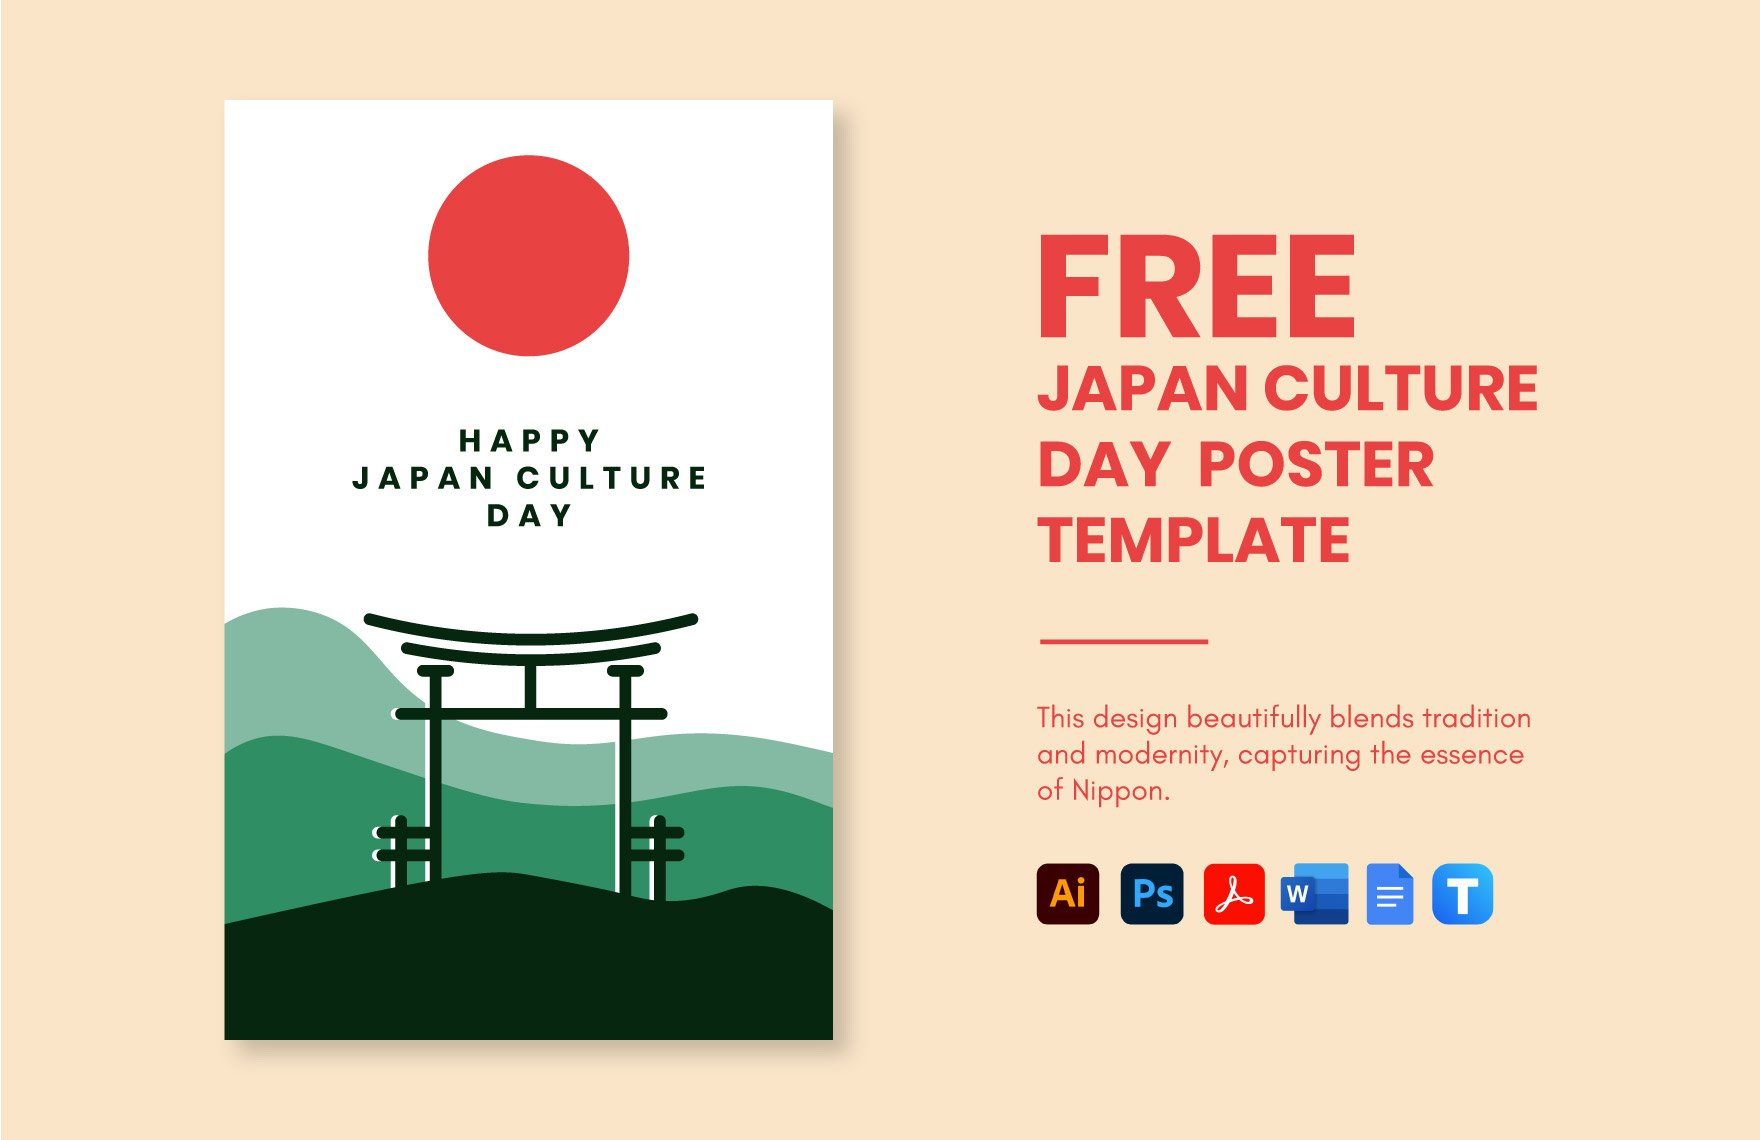 Japan Culture Day Poster Template in Word, Google Docs, PDF, Illustrator, PSD